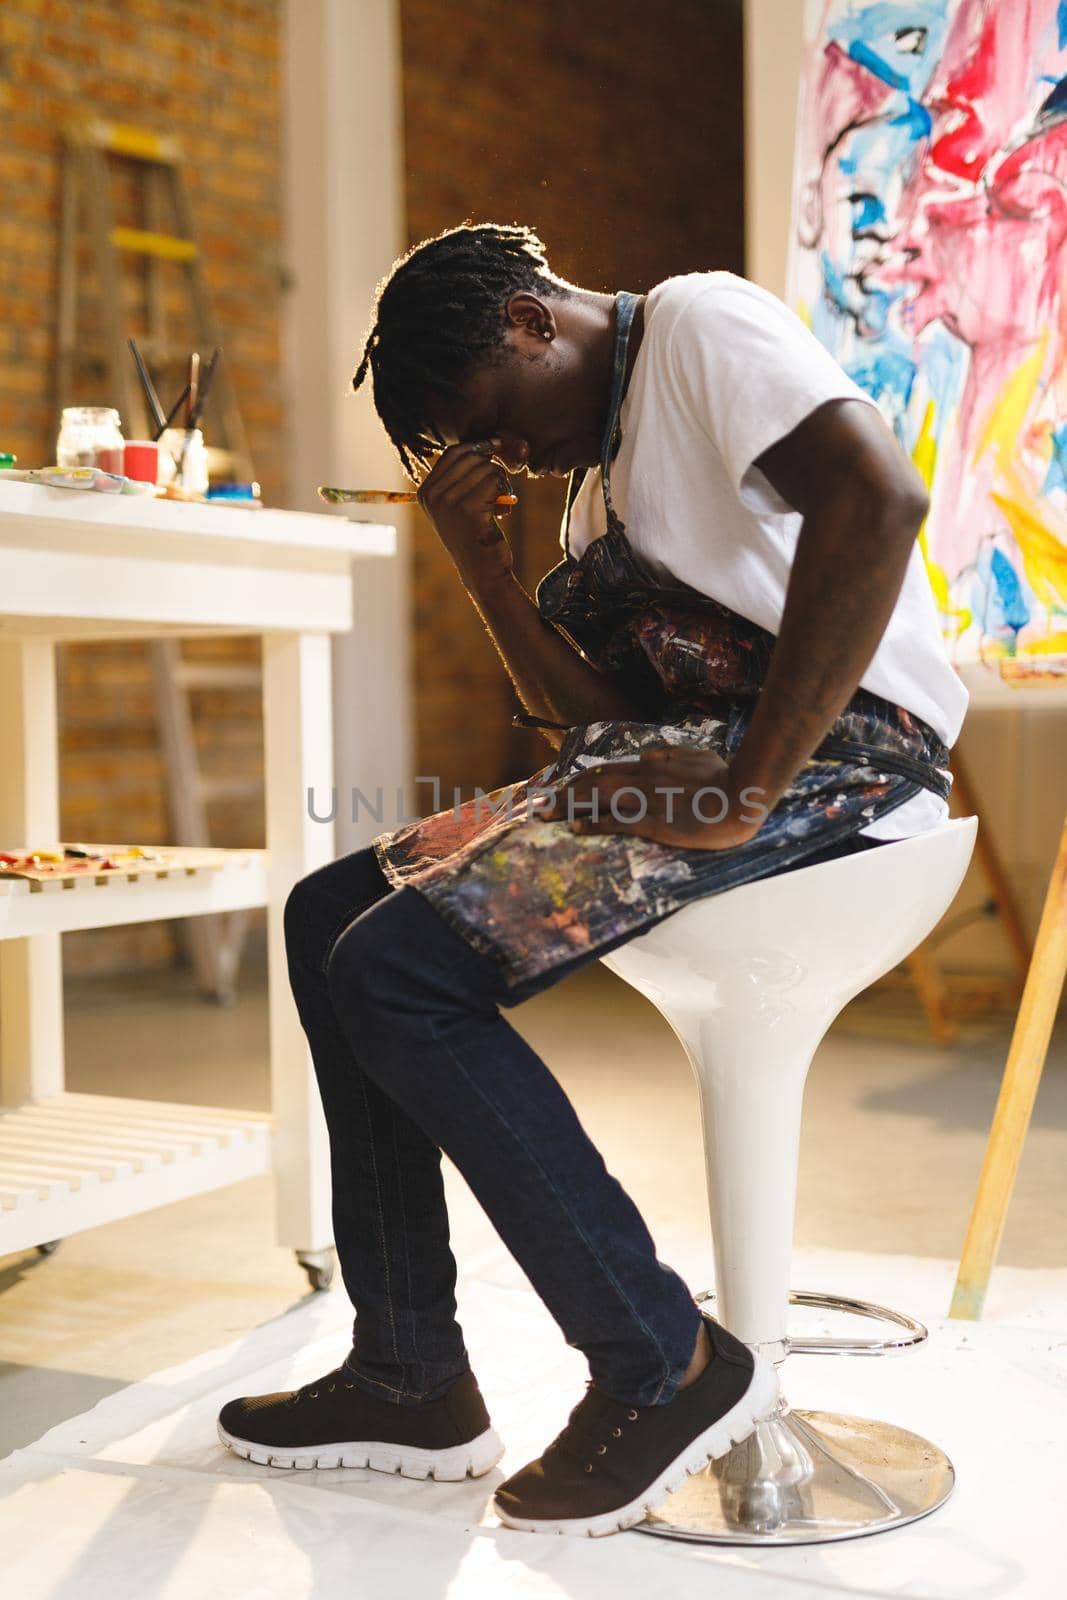 Tired african american male painter at work in art studio. creation and inspiration at an artists painting studio.